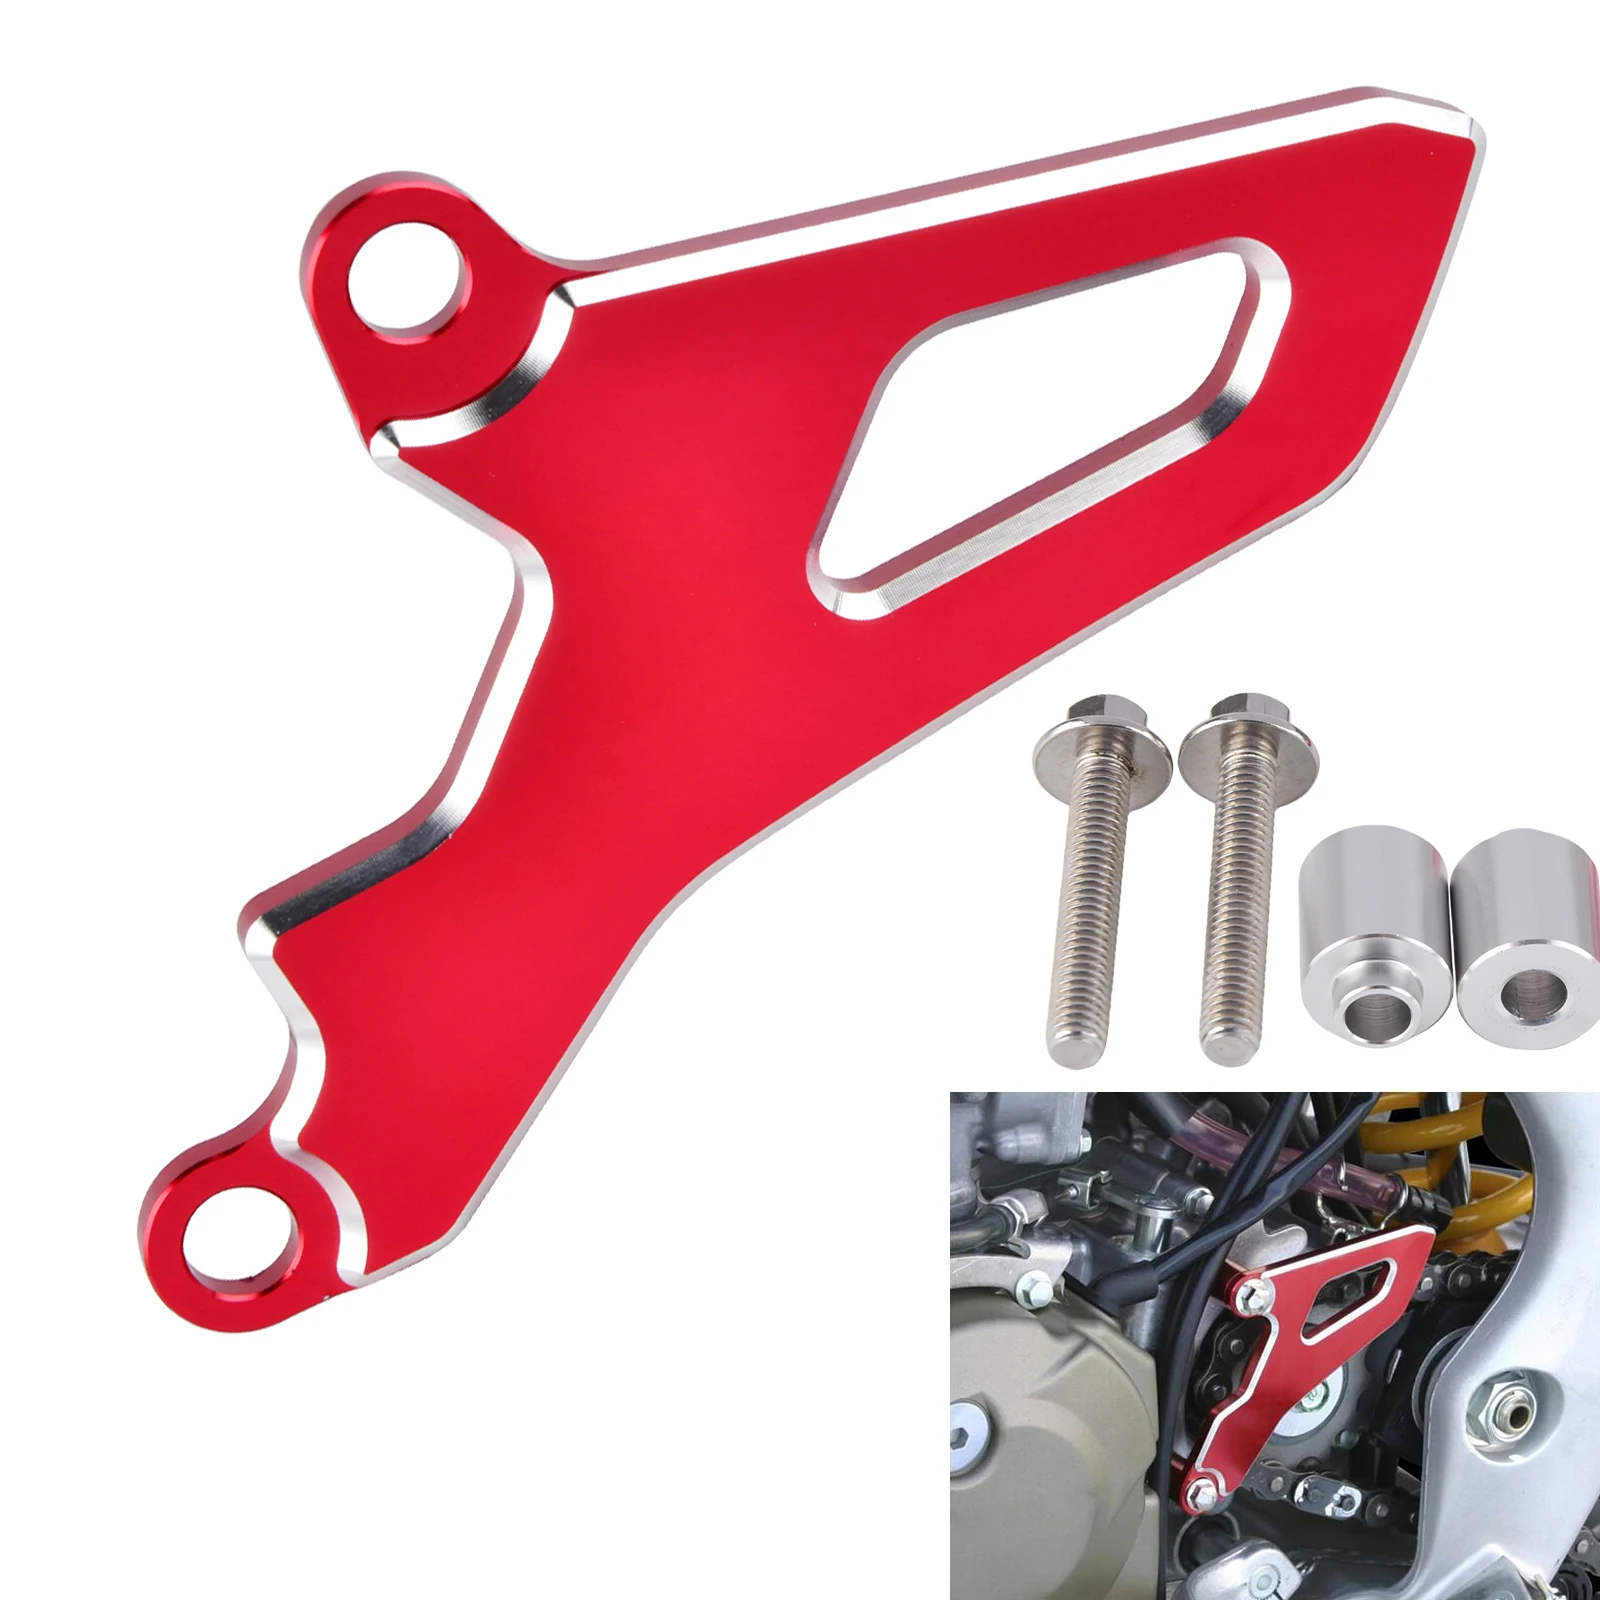 CRF230F Front Sprocket Guard,CNC Front Sprocket Cover Protector Guide For CRF230F 2003-2019 